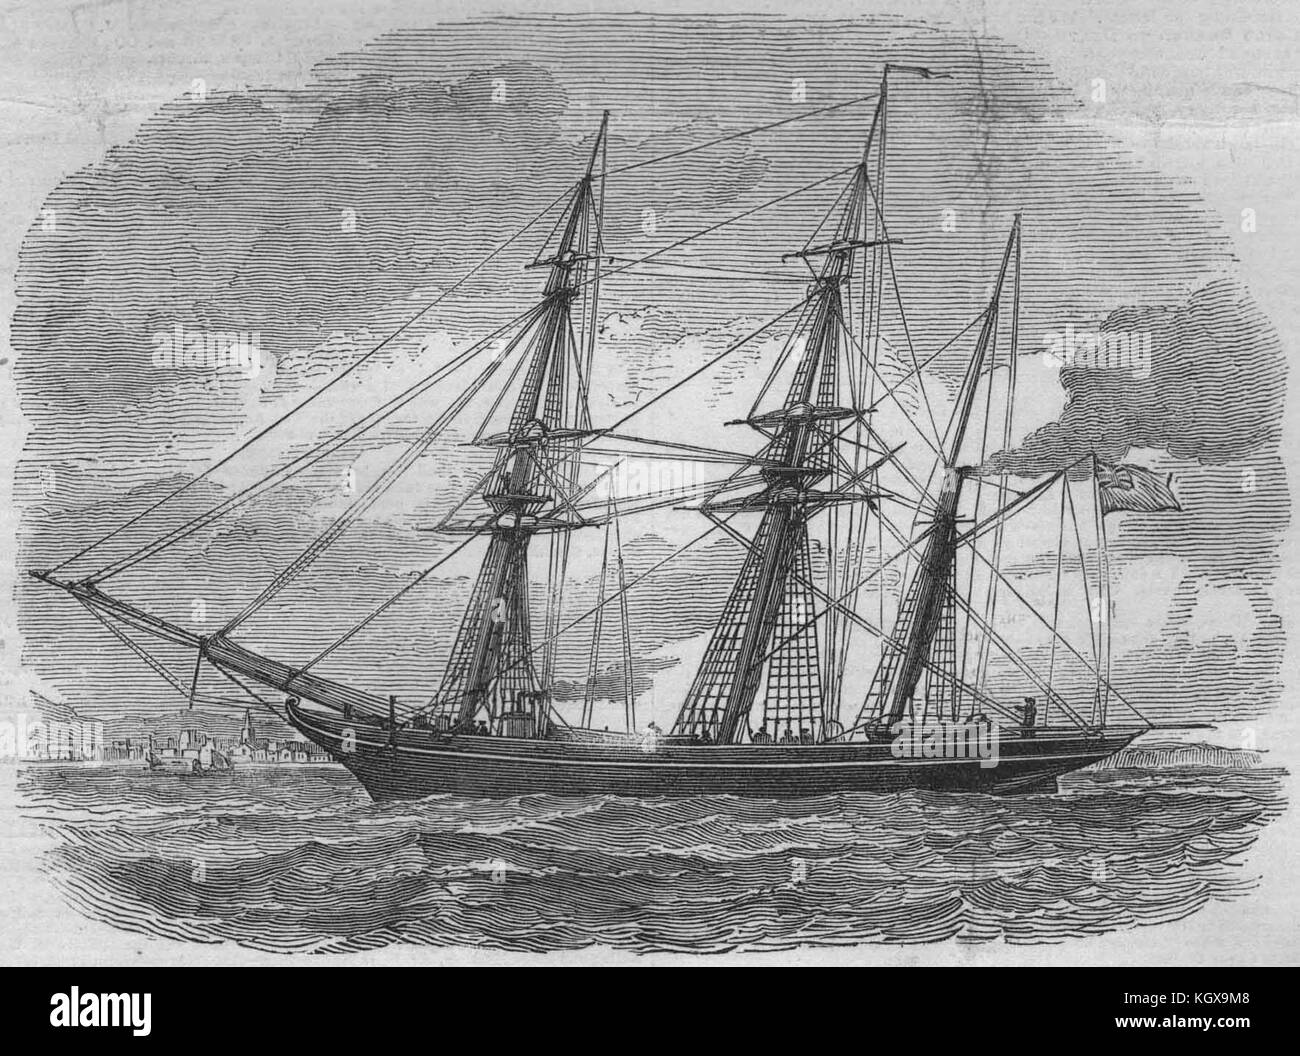 The iron steam screw collier, 'Q. E. D.'. Ships 1844. The Illustrated London News Stock Photo